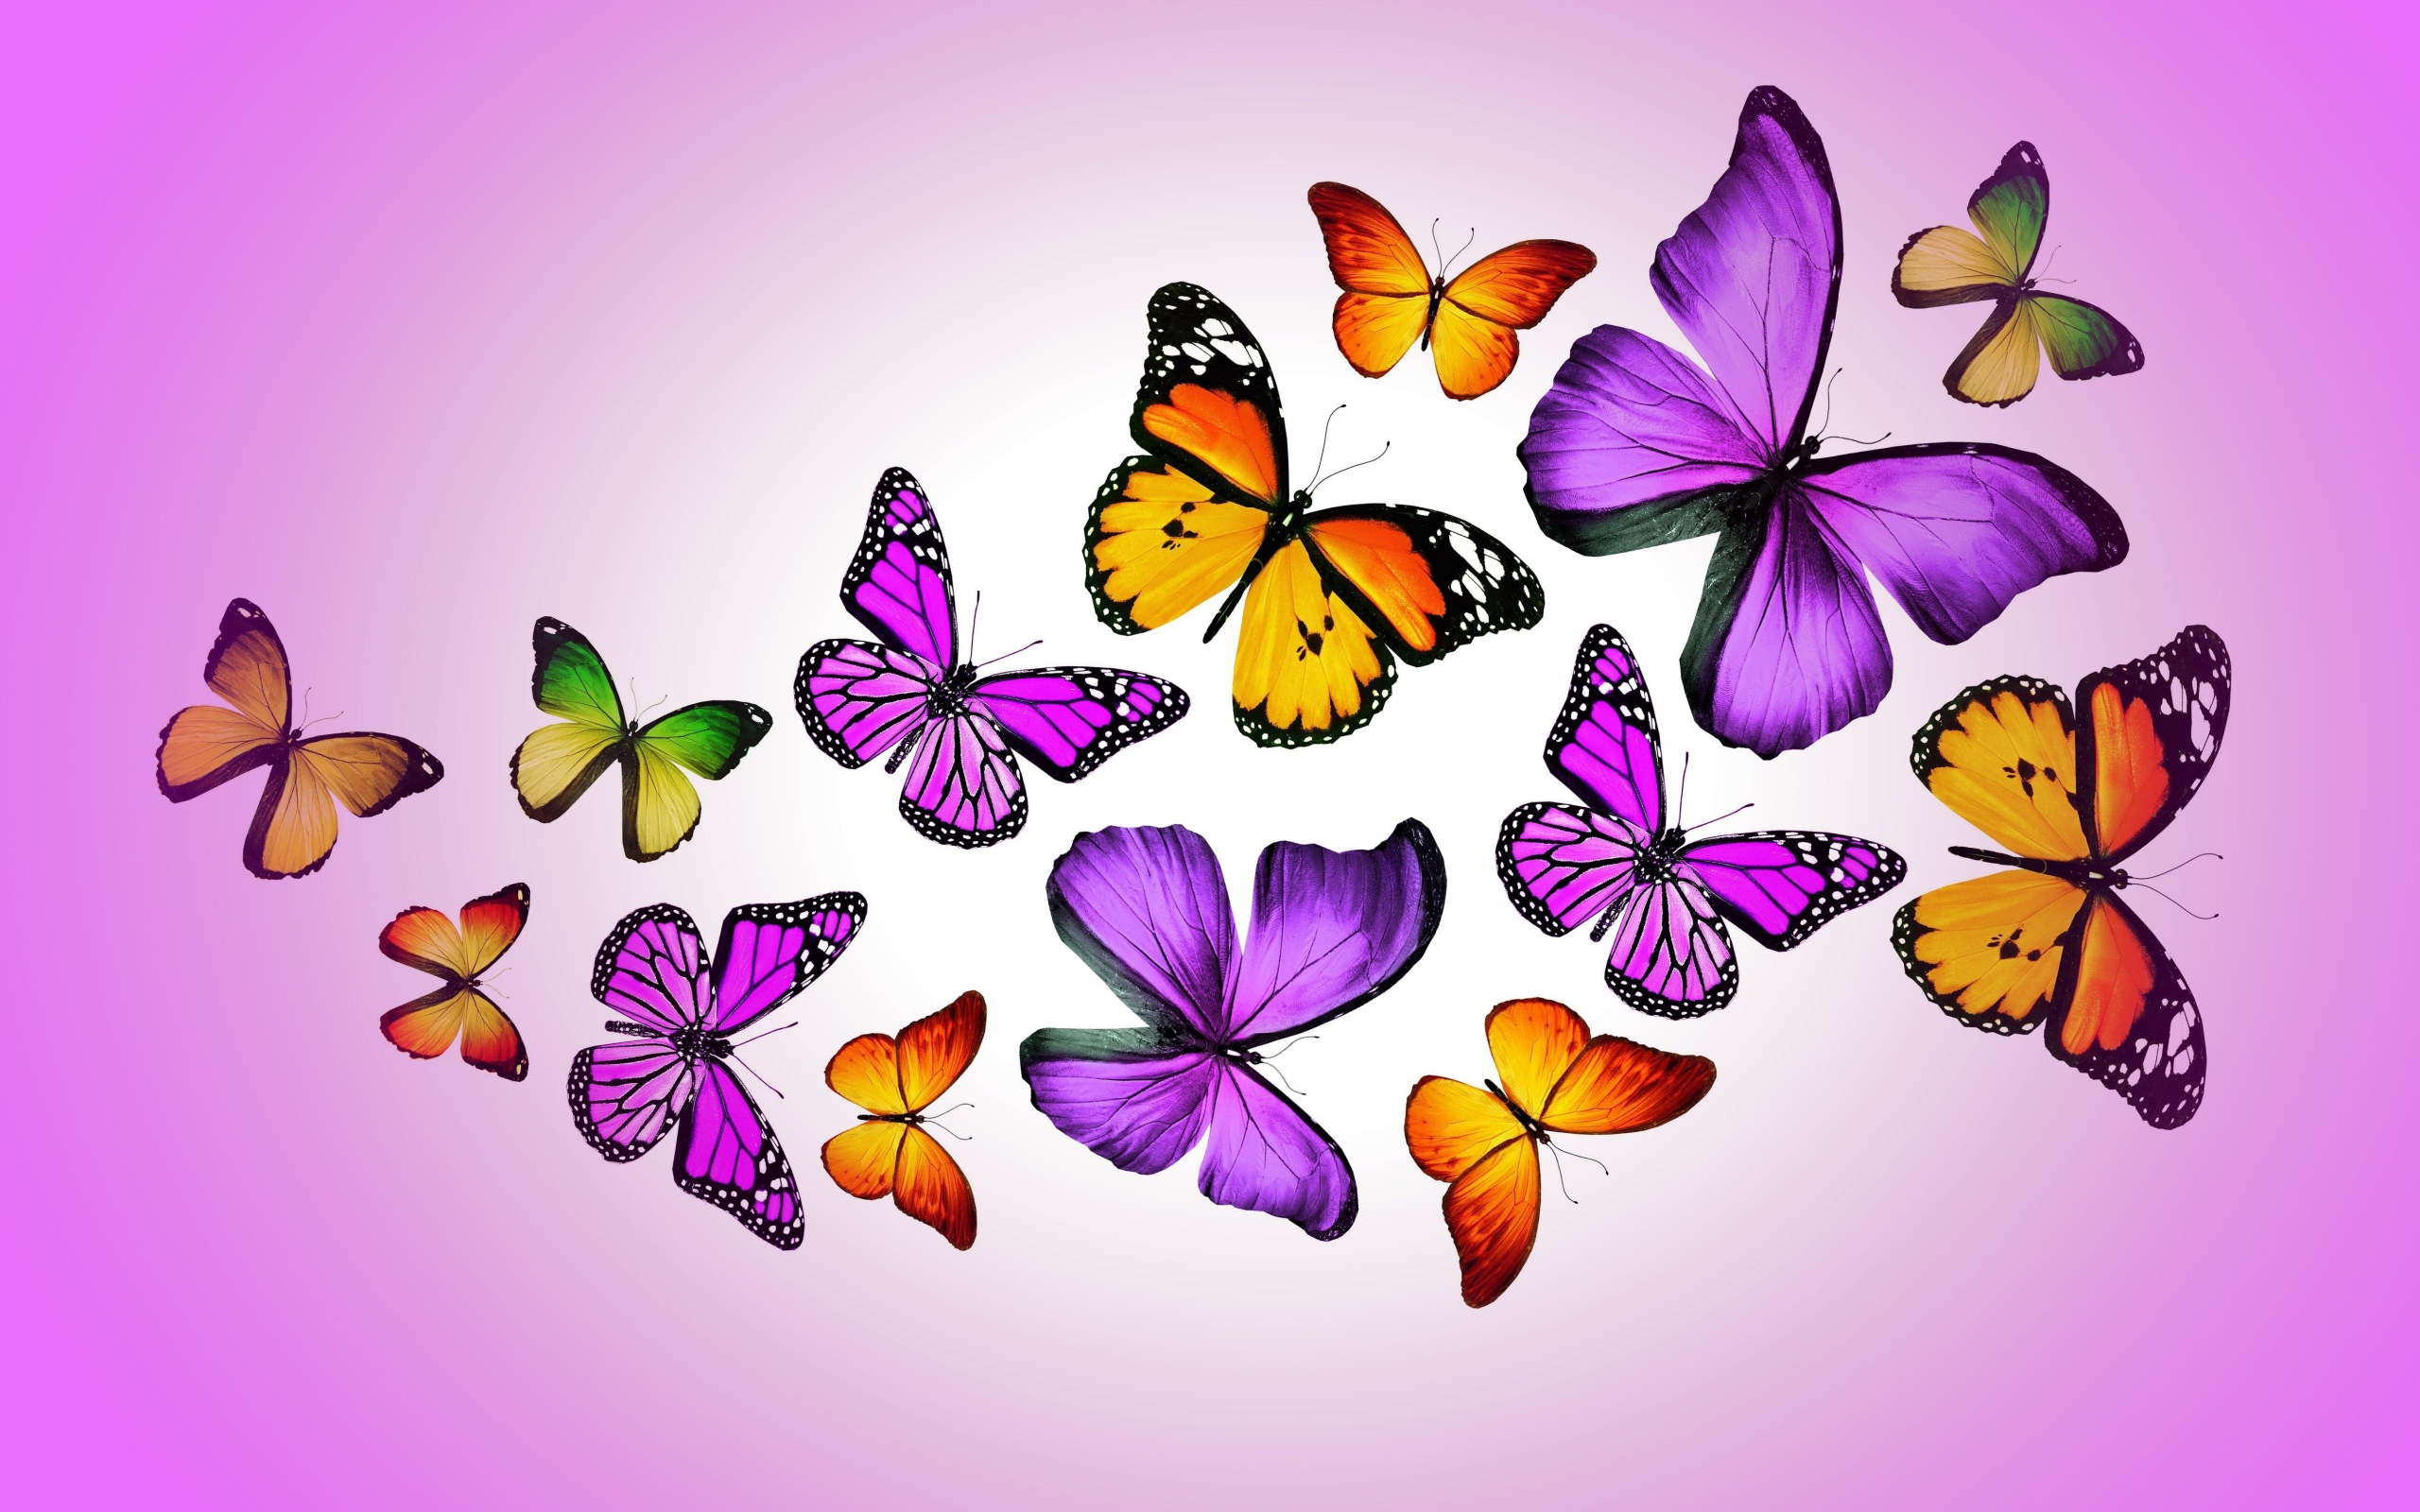 Many multicolored butterflies on a lilac background, 3d graphics